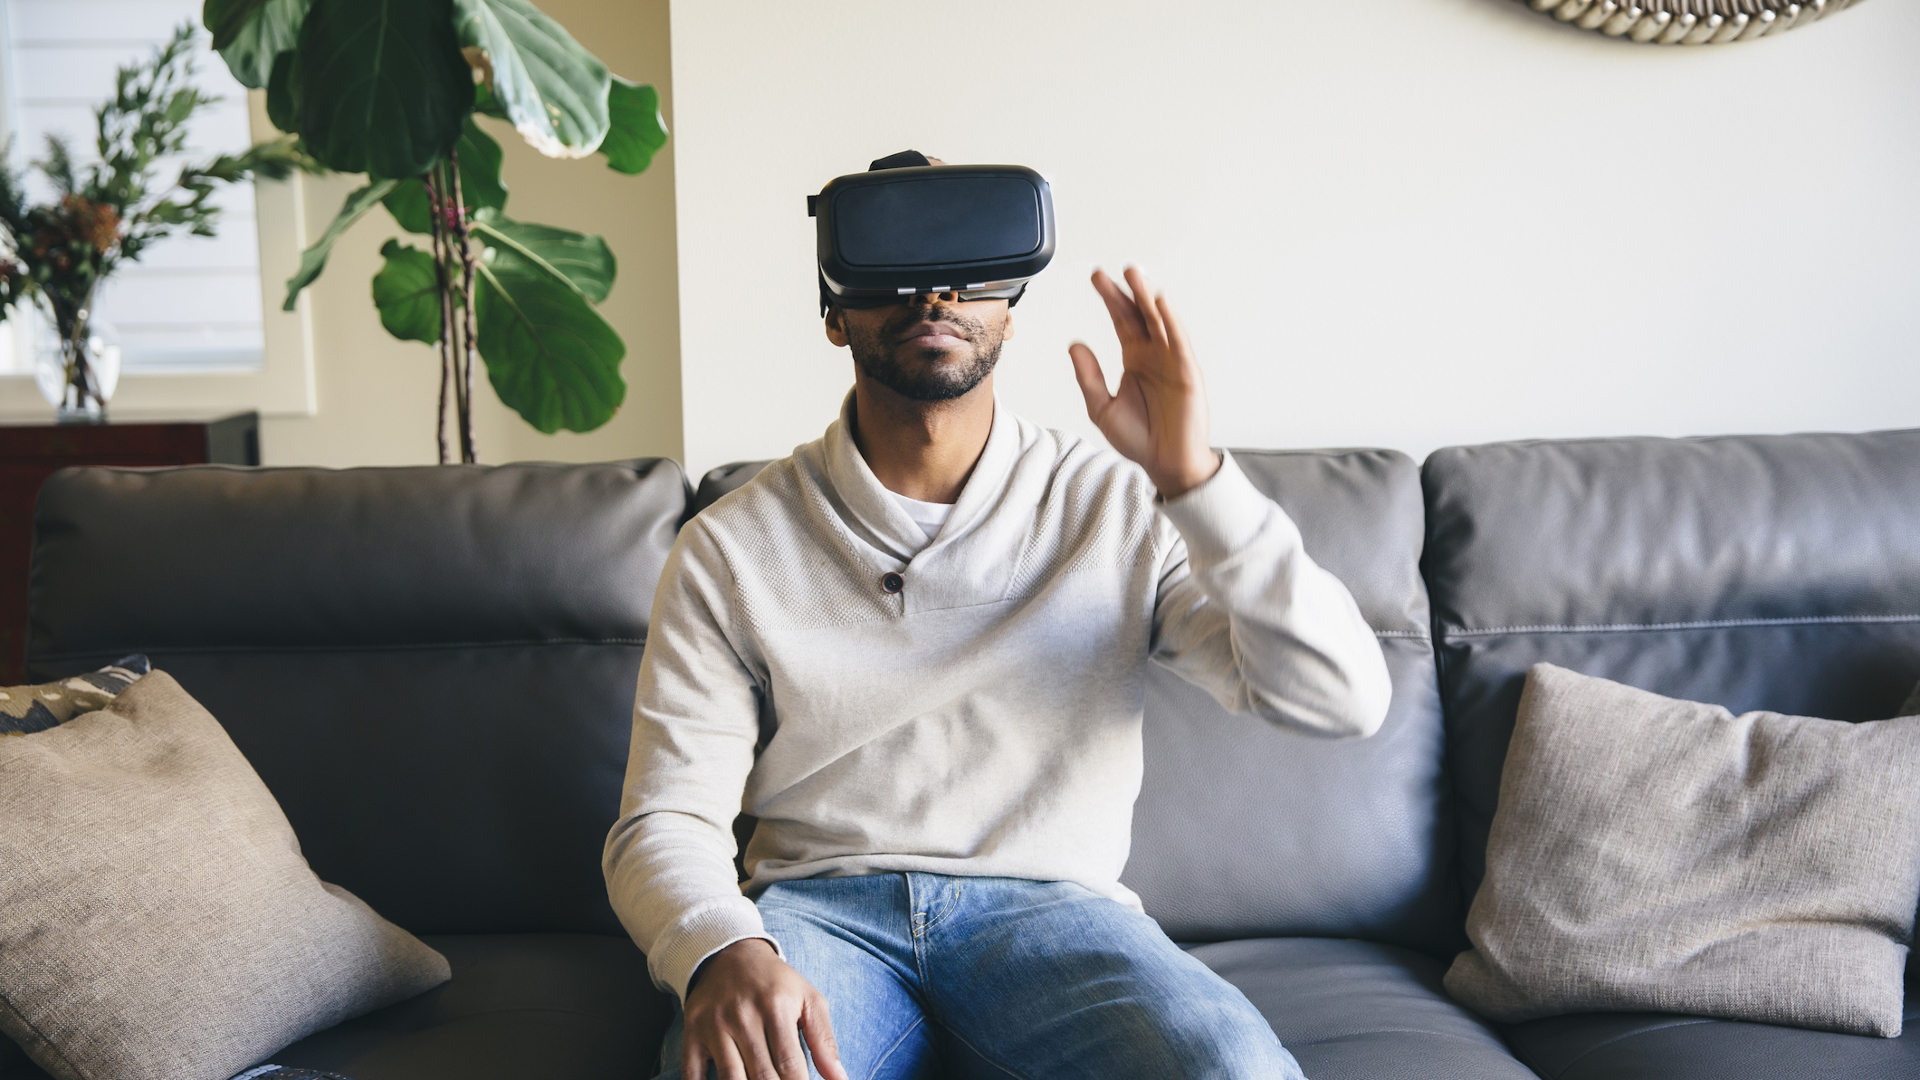 hedge Feud painful What causes motion sickness in VR, and how can you avoid it? | Space